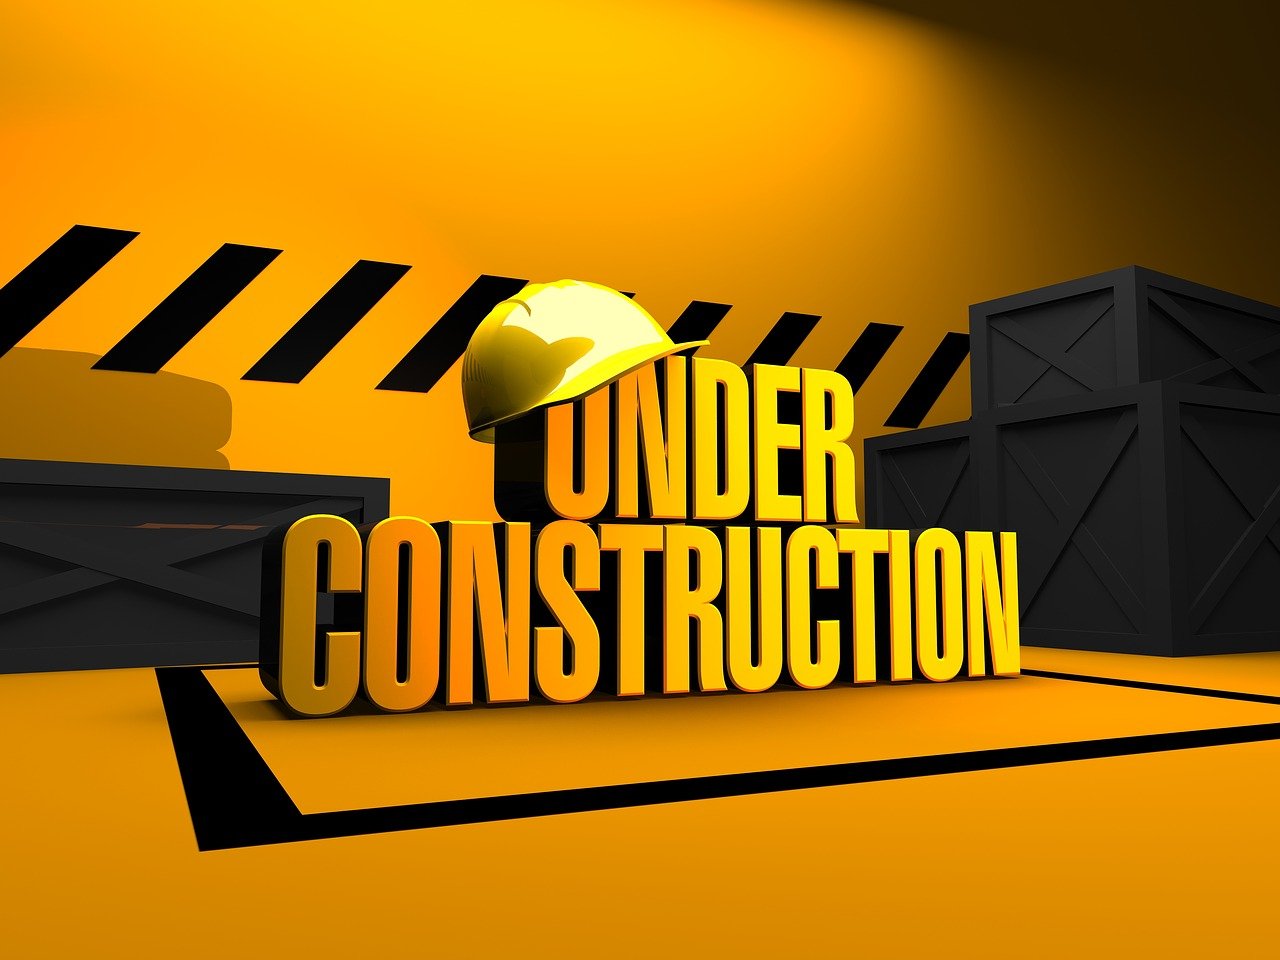 Unigroup of Companies is under construction